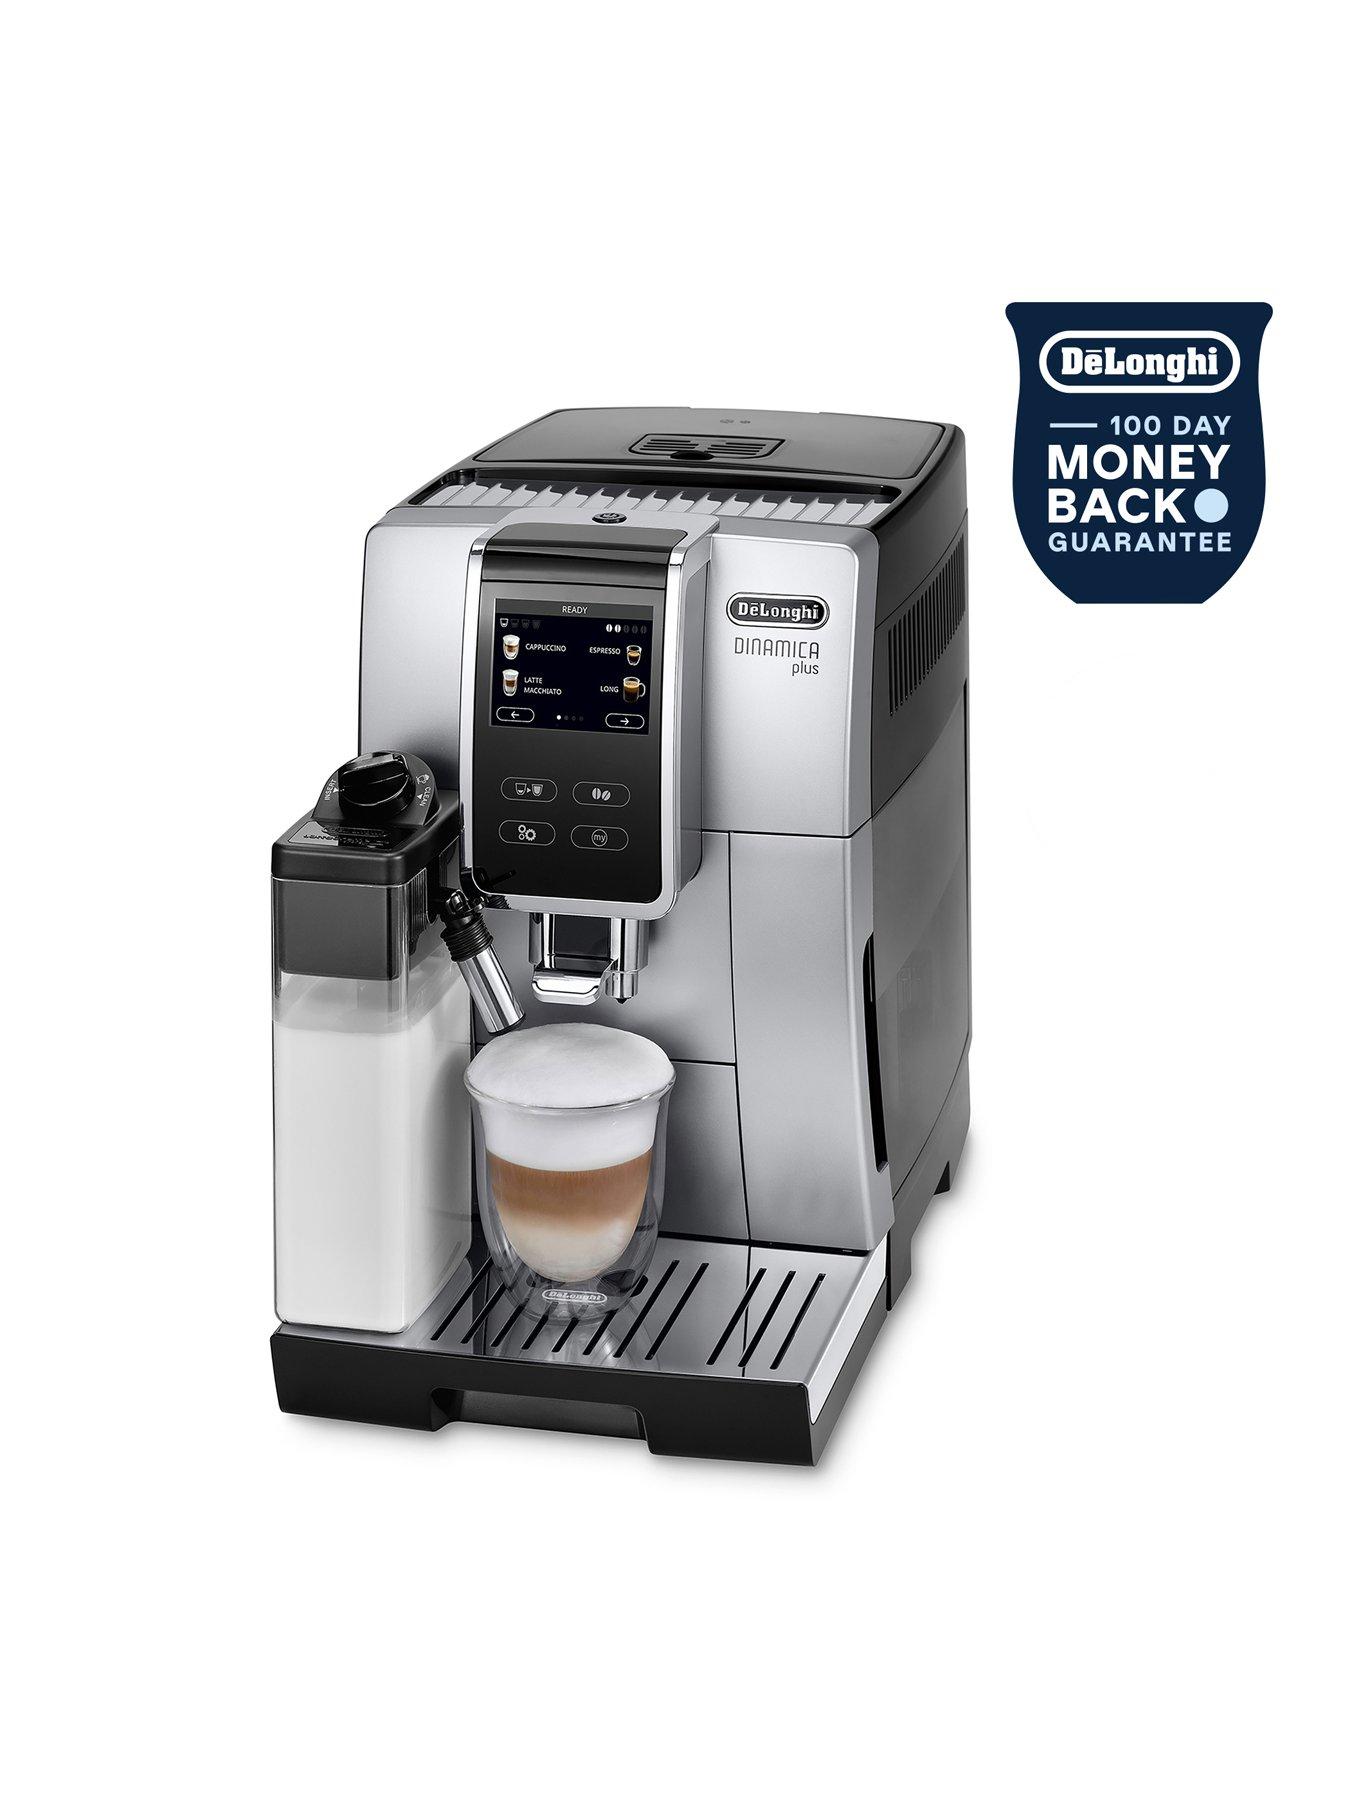 De'Longhi Rivelia EXAM440.55.W, Fully Automatic Coffee Machine with  LatteCrema Hot, Automatic Milk Frother, Compact Size Bean to Cup Coffee  Machine